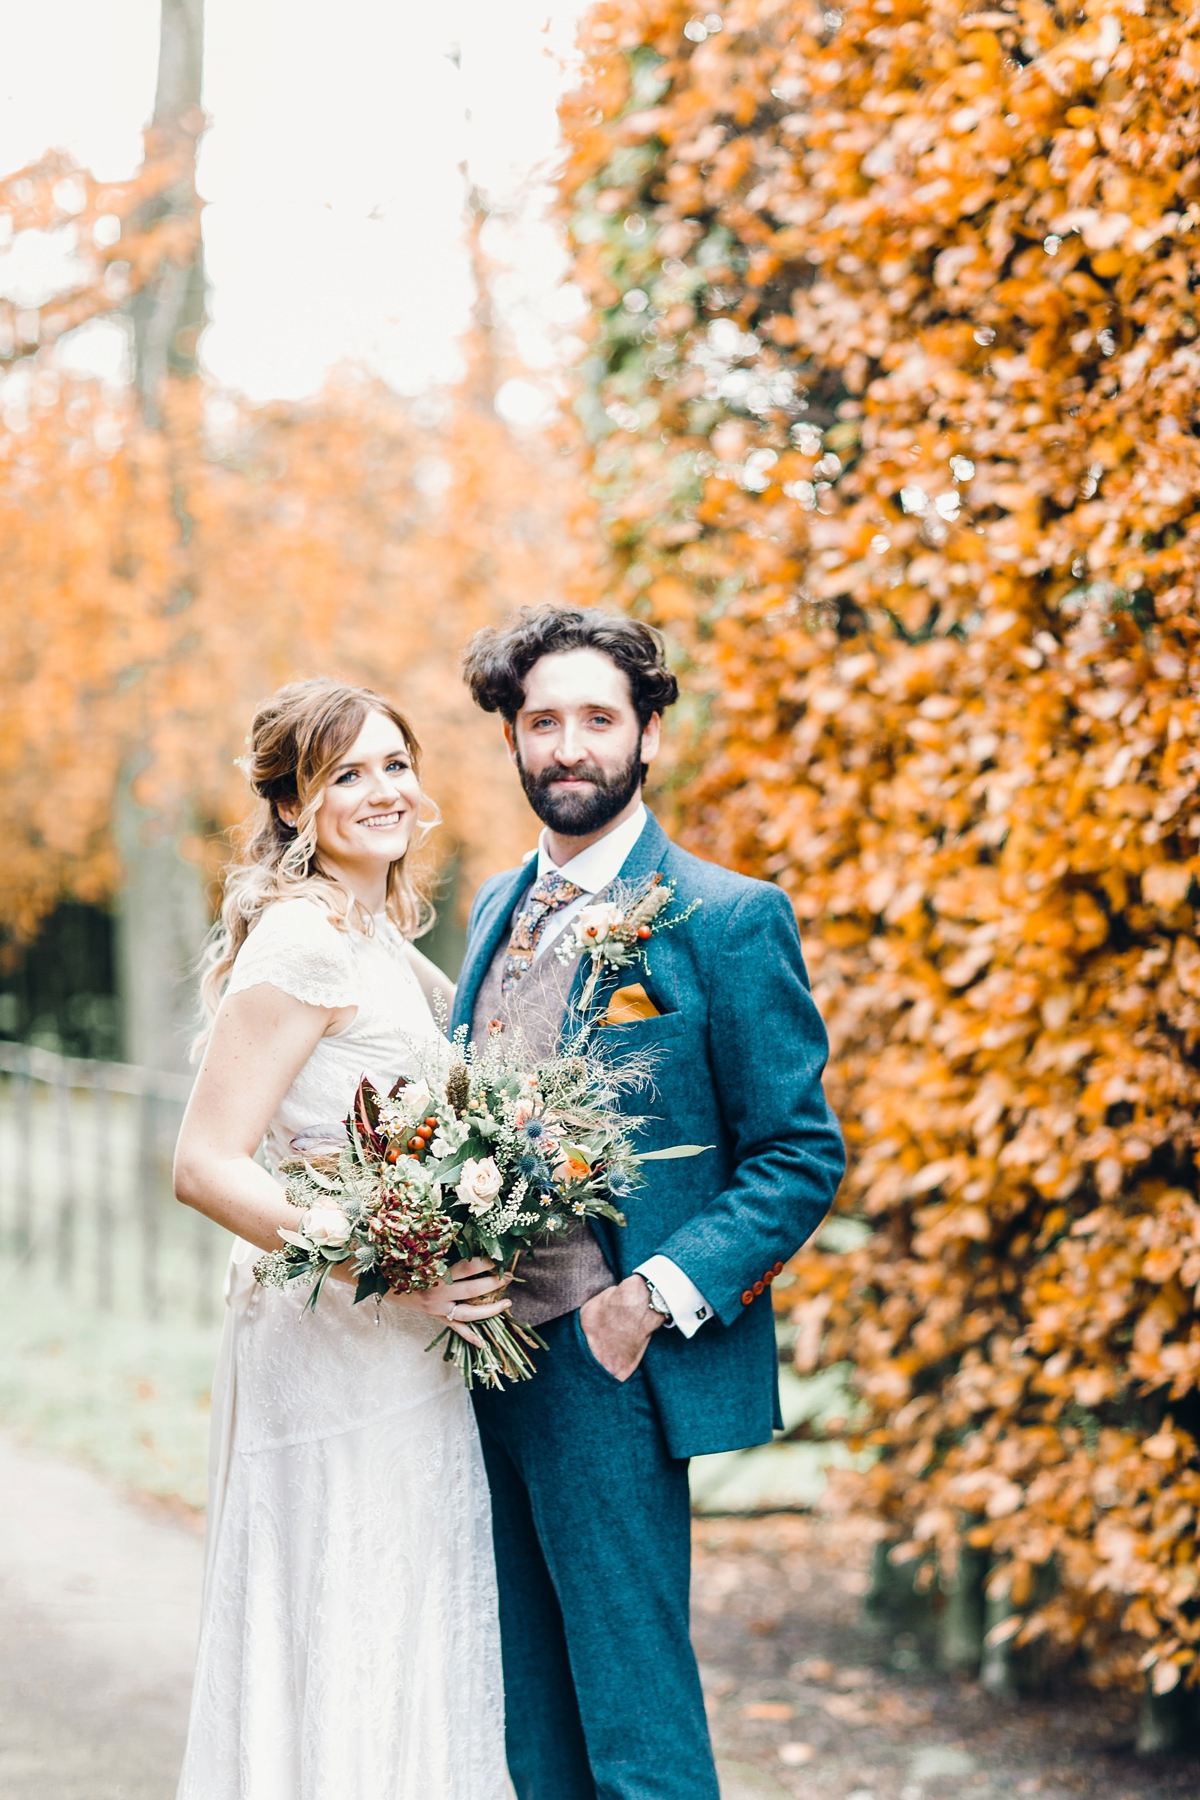 31 A Charlie Brear bride and her rustic Autumn Barn wedding in Southport